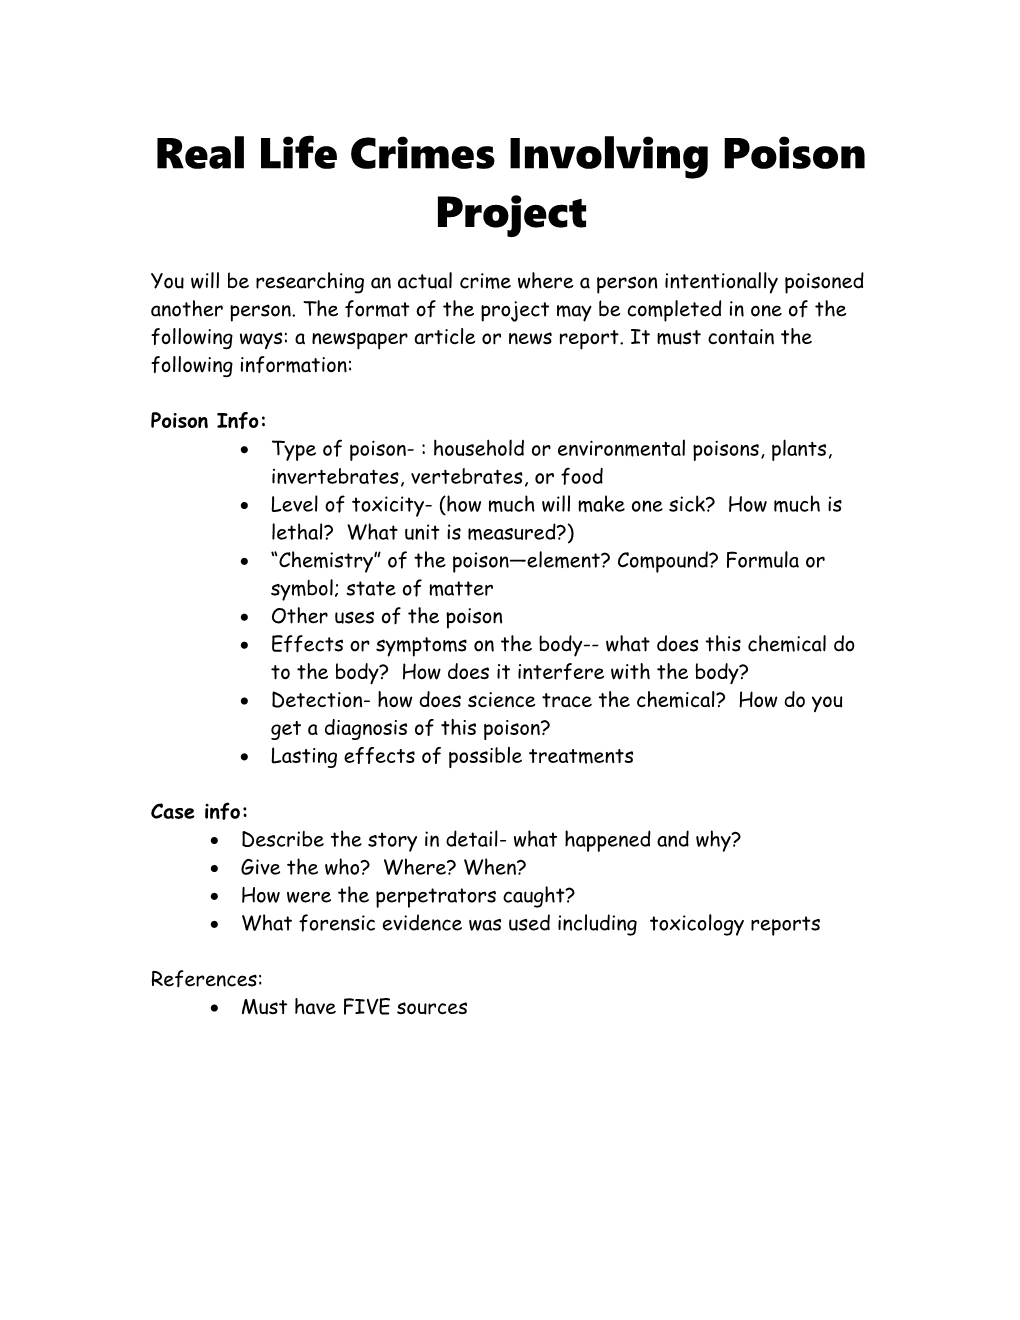 Real Life Crimes Involving Poison Project